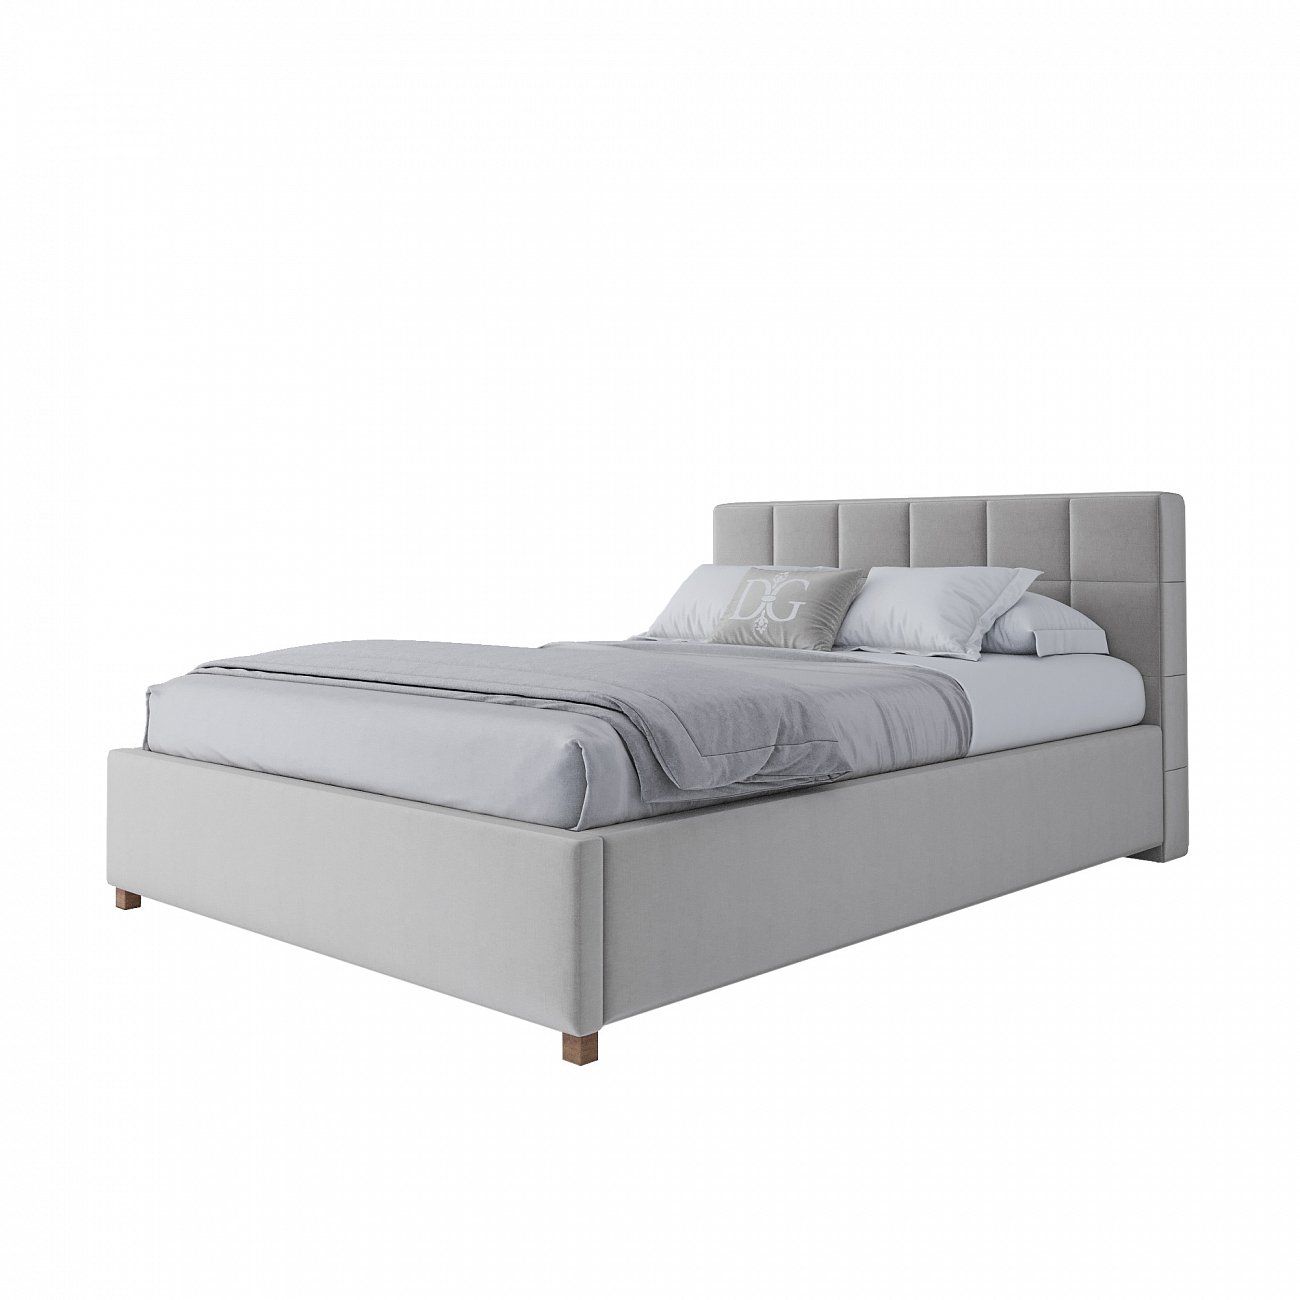 Double bed with upholstered headboard 160x200 cm light beige Wales